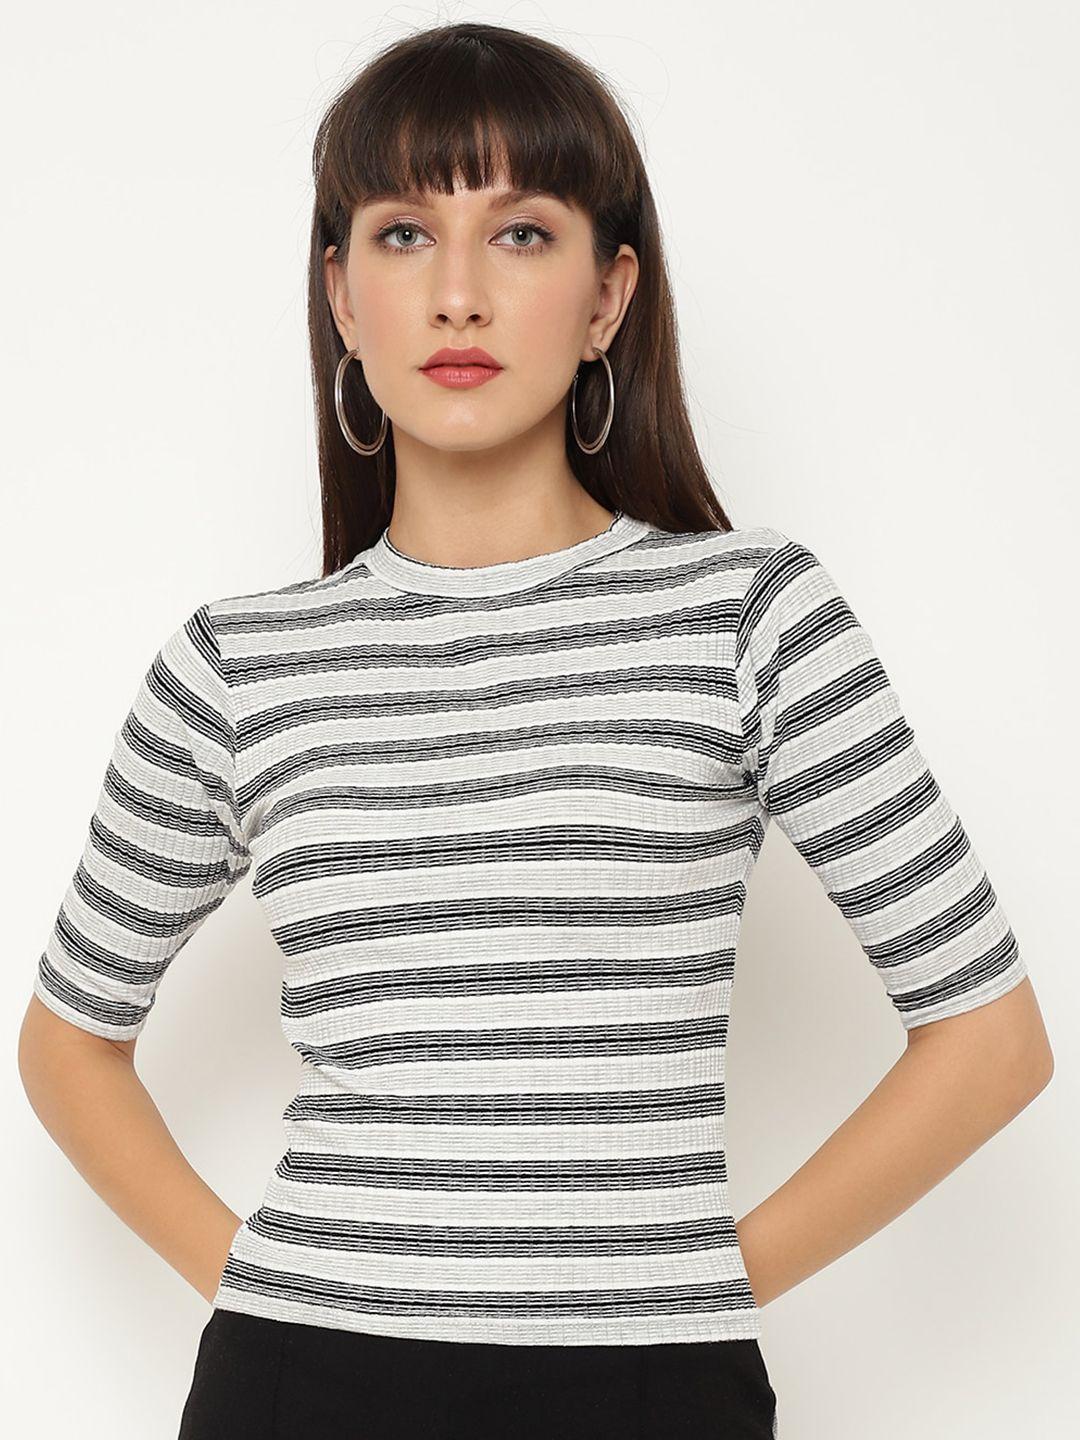 chkokko women grey & white striped fitted top